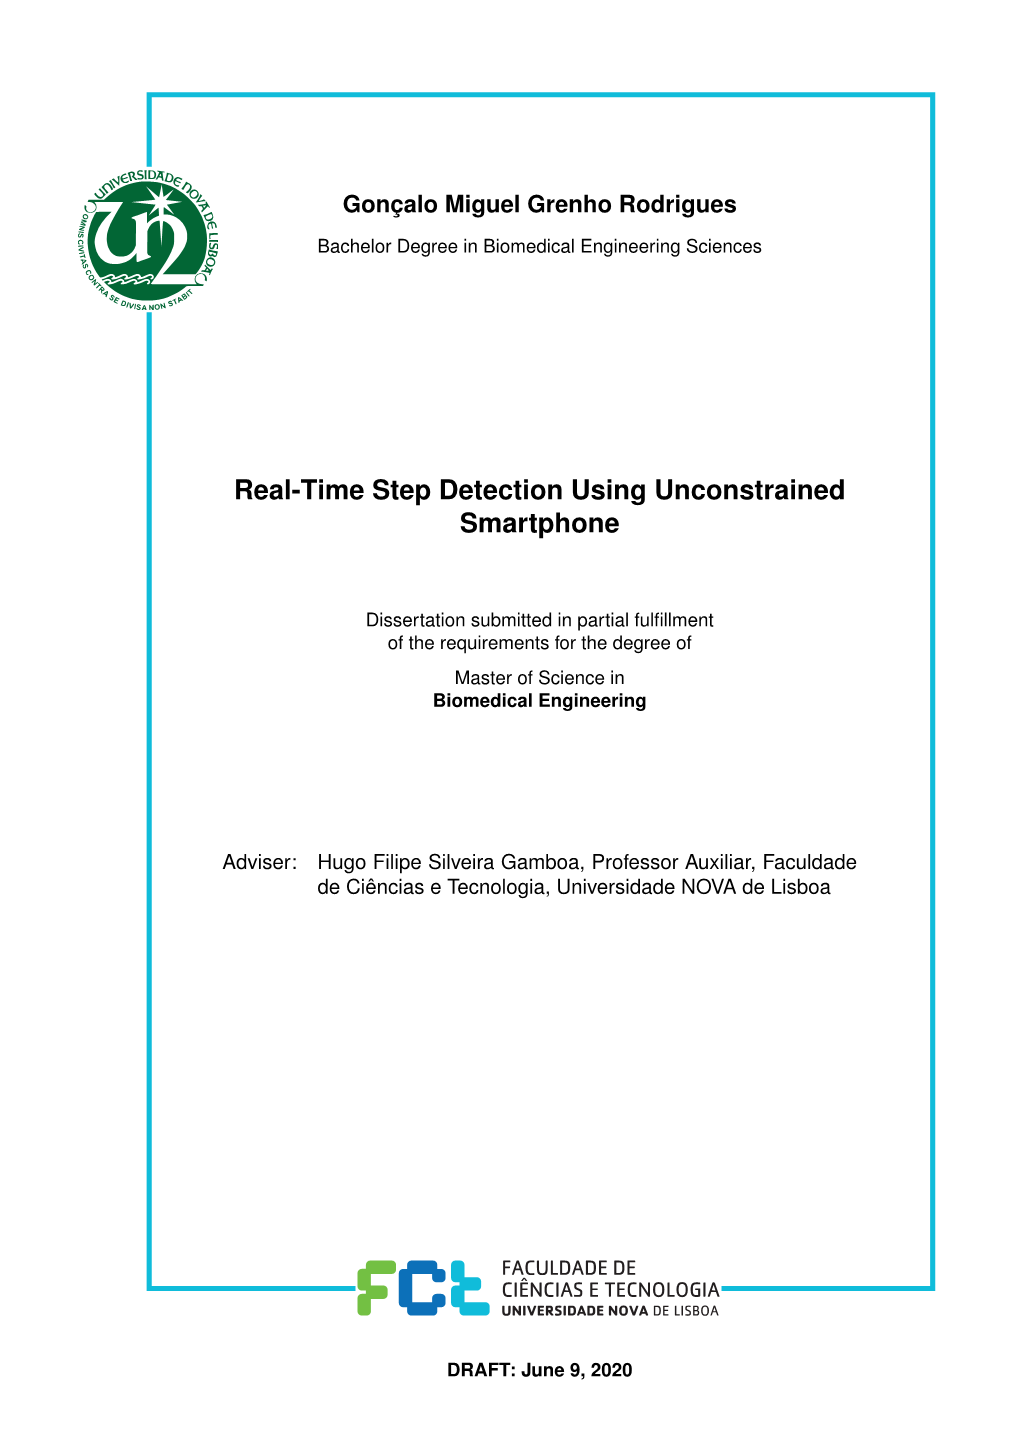 Real-Time Step Detection Using Unconstrained Smartphone